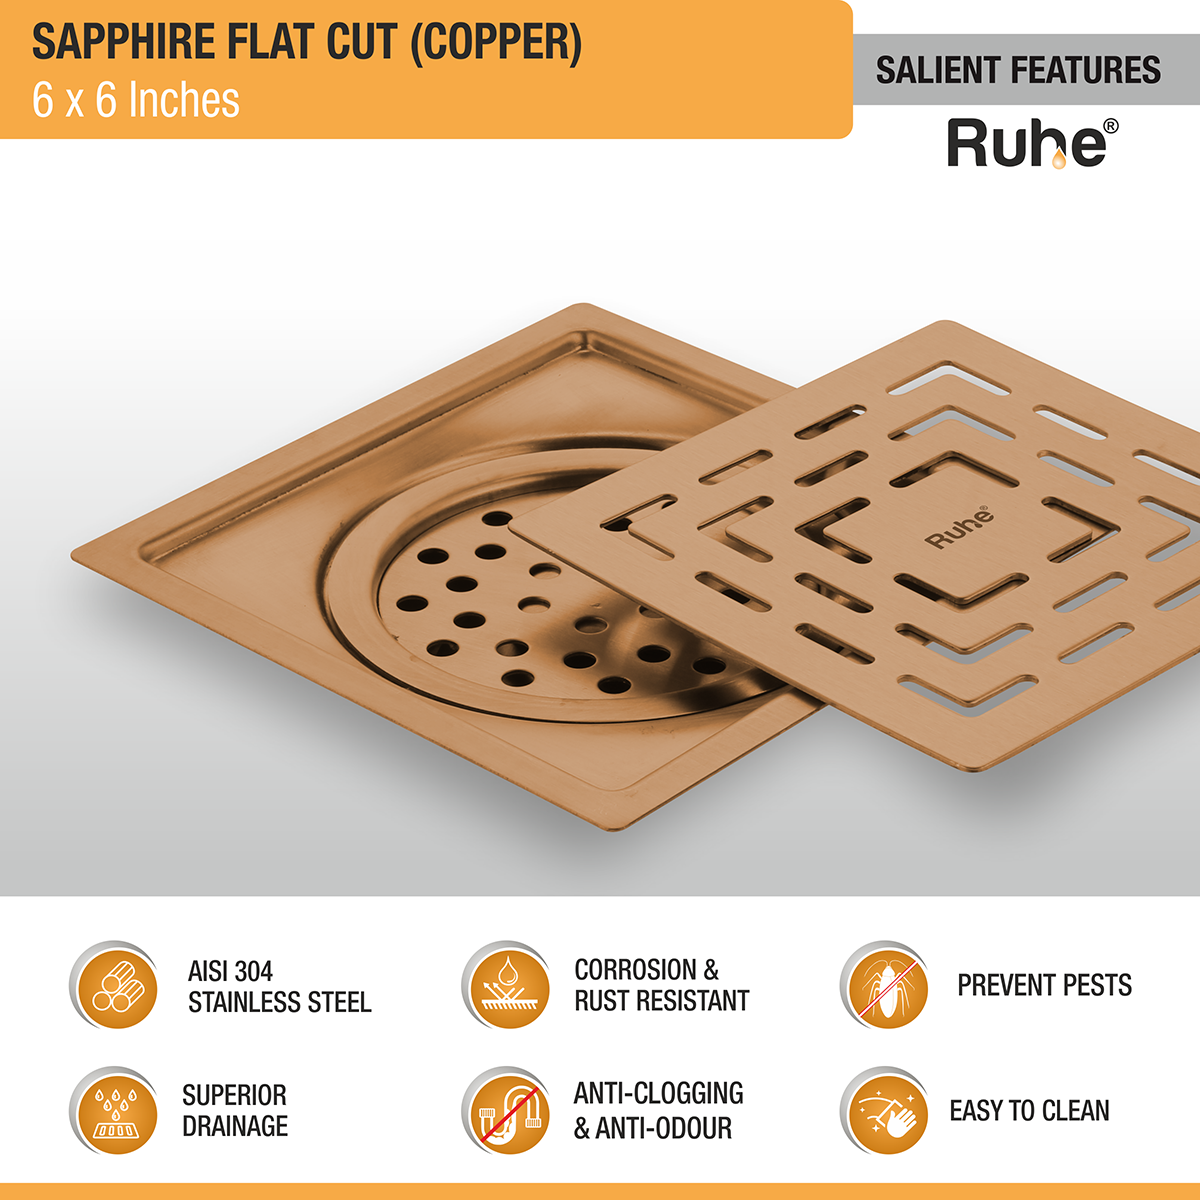 Sapphire Square Flat Cut Floor Drain in Antique Copper PVD Coating (6 x 6 Inches) features